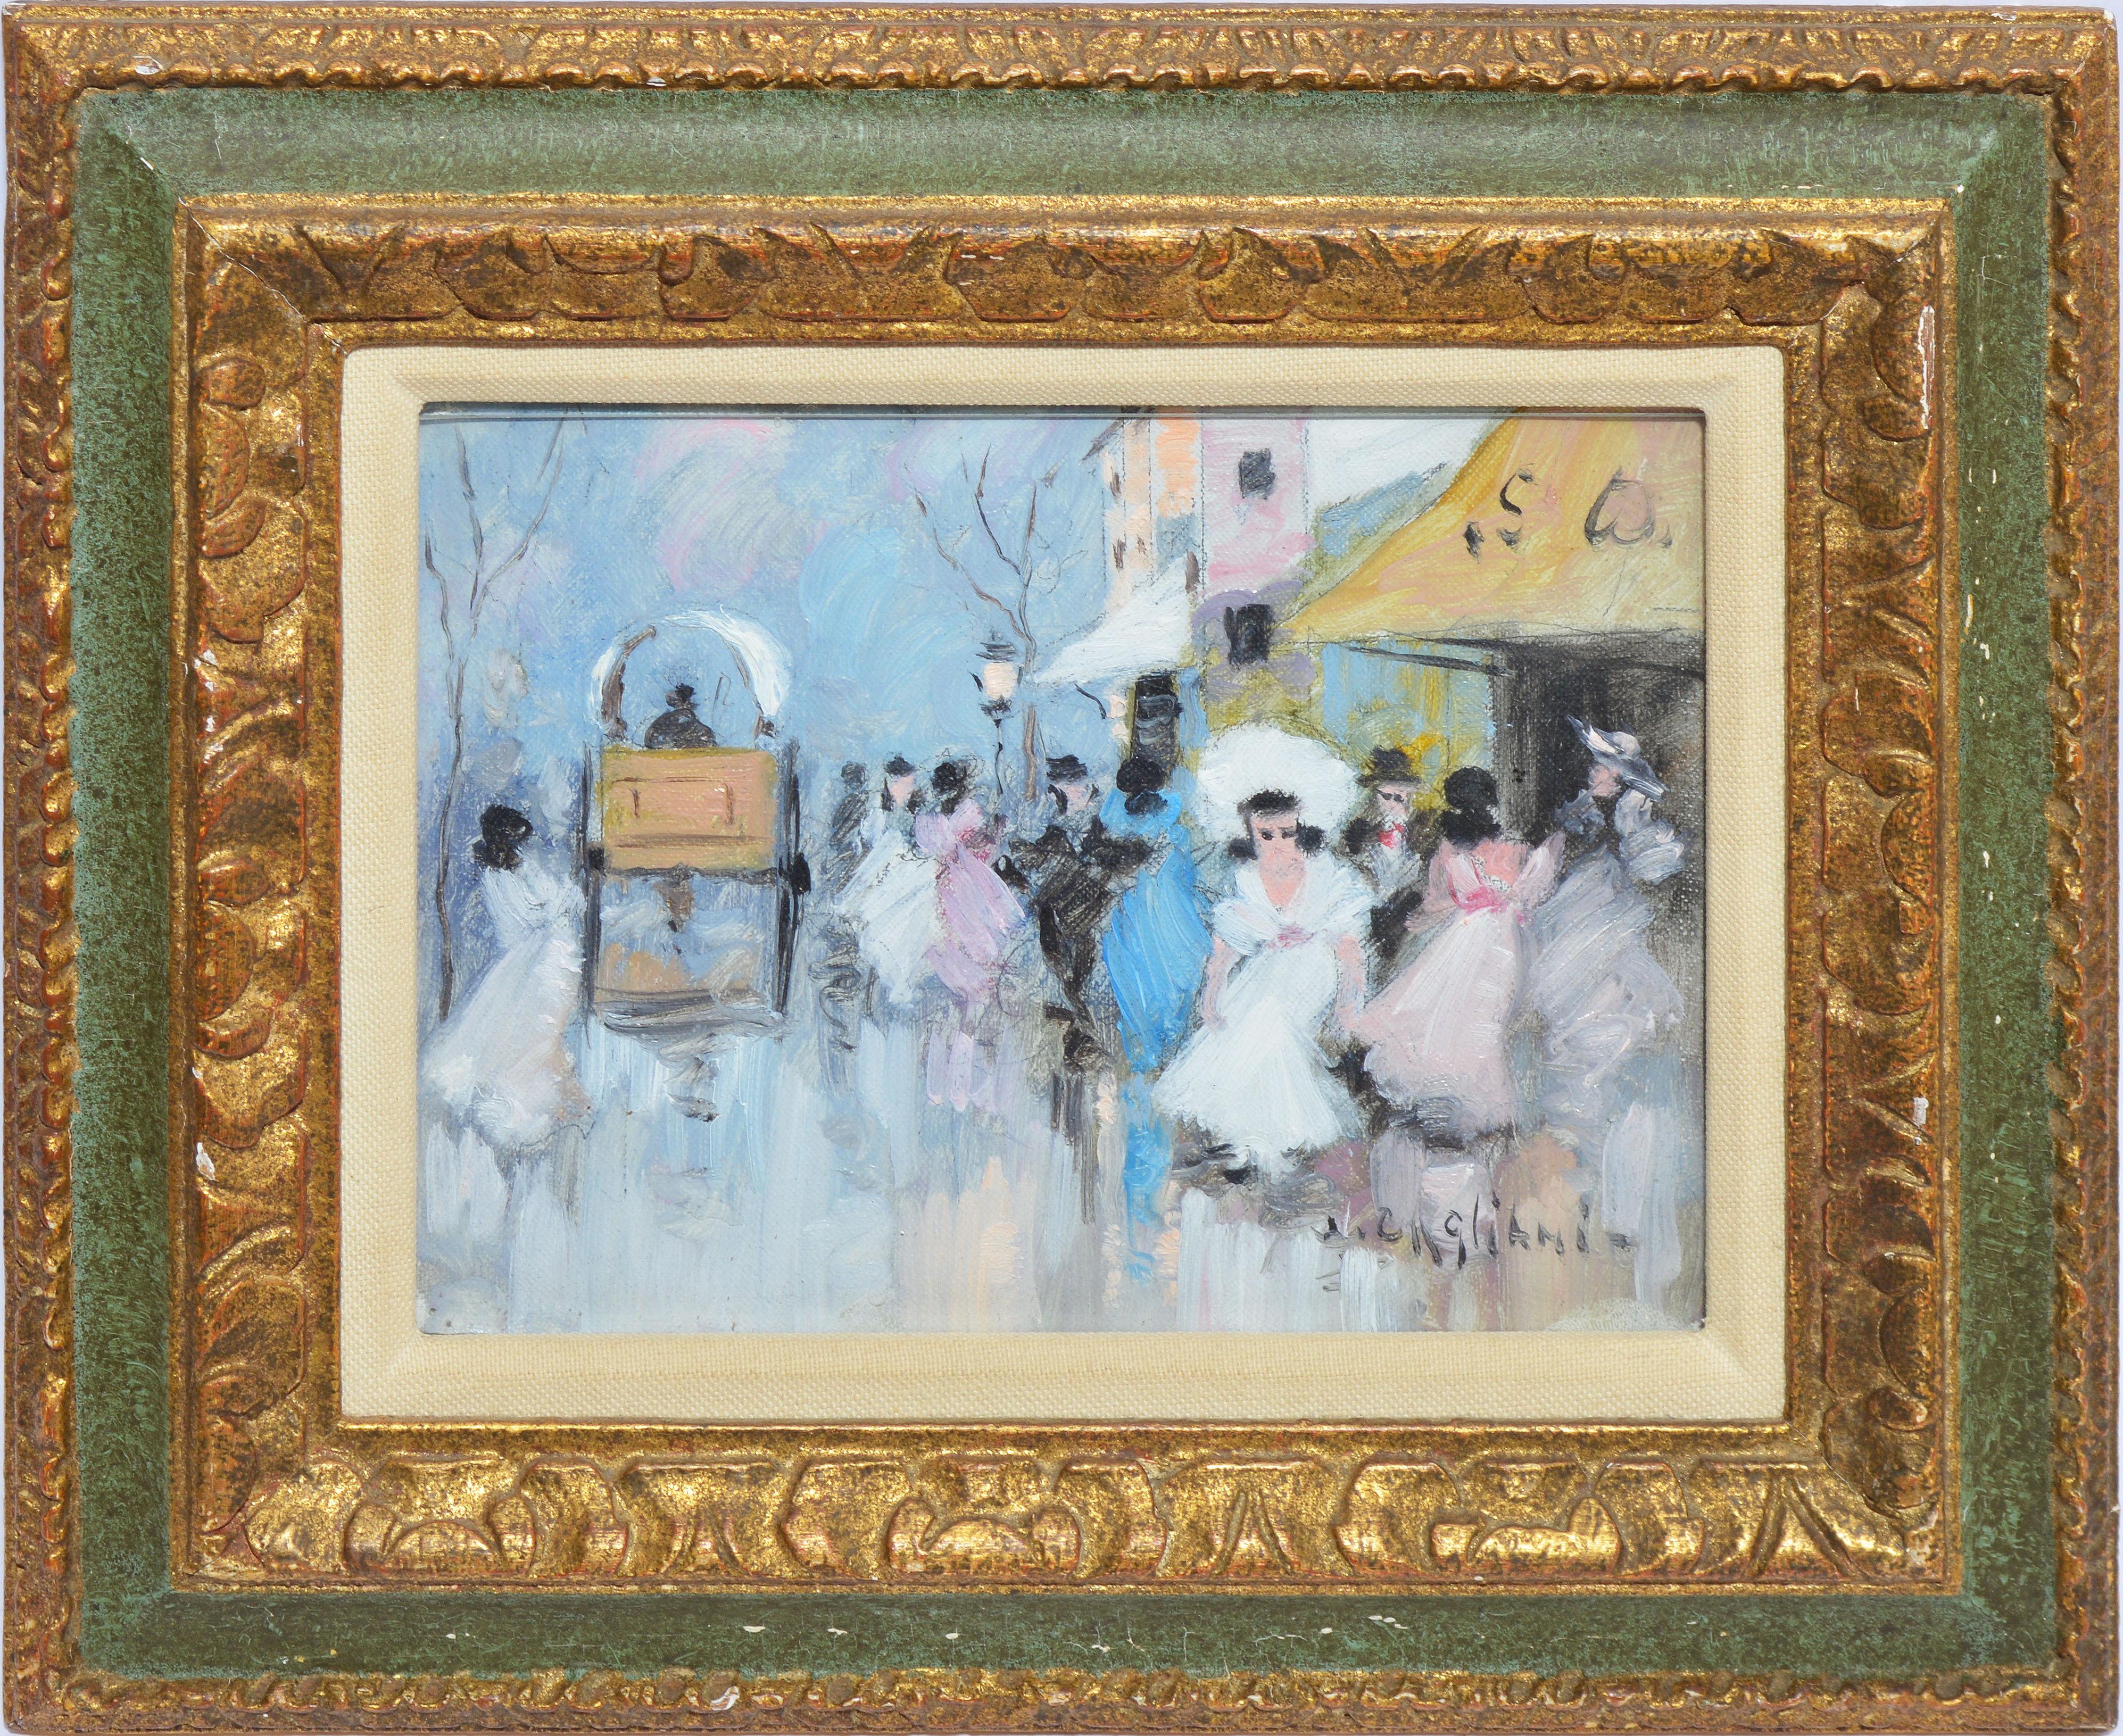 Impressionist view of a street scene by Luigi Cagliani. Oil on canvas, circa 1940. Signed. Displayed in a period giltwood frame. Image, 8"L x 6"H, overall 12"L x 10"H.
